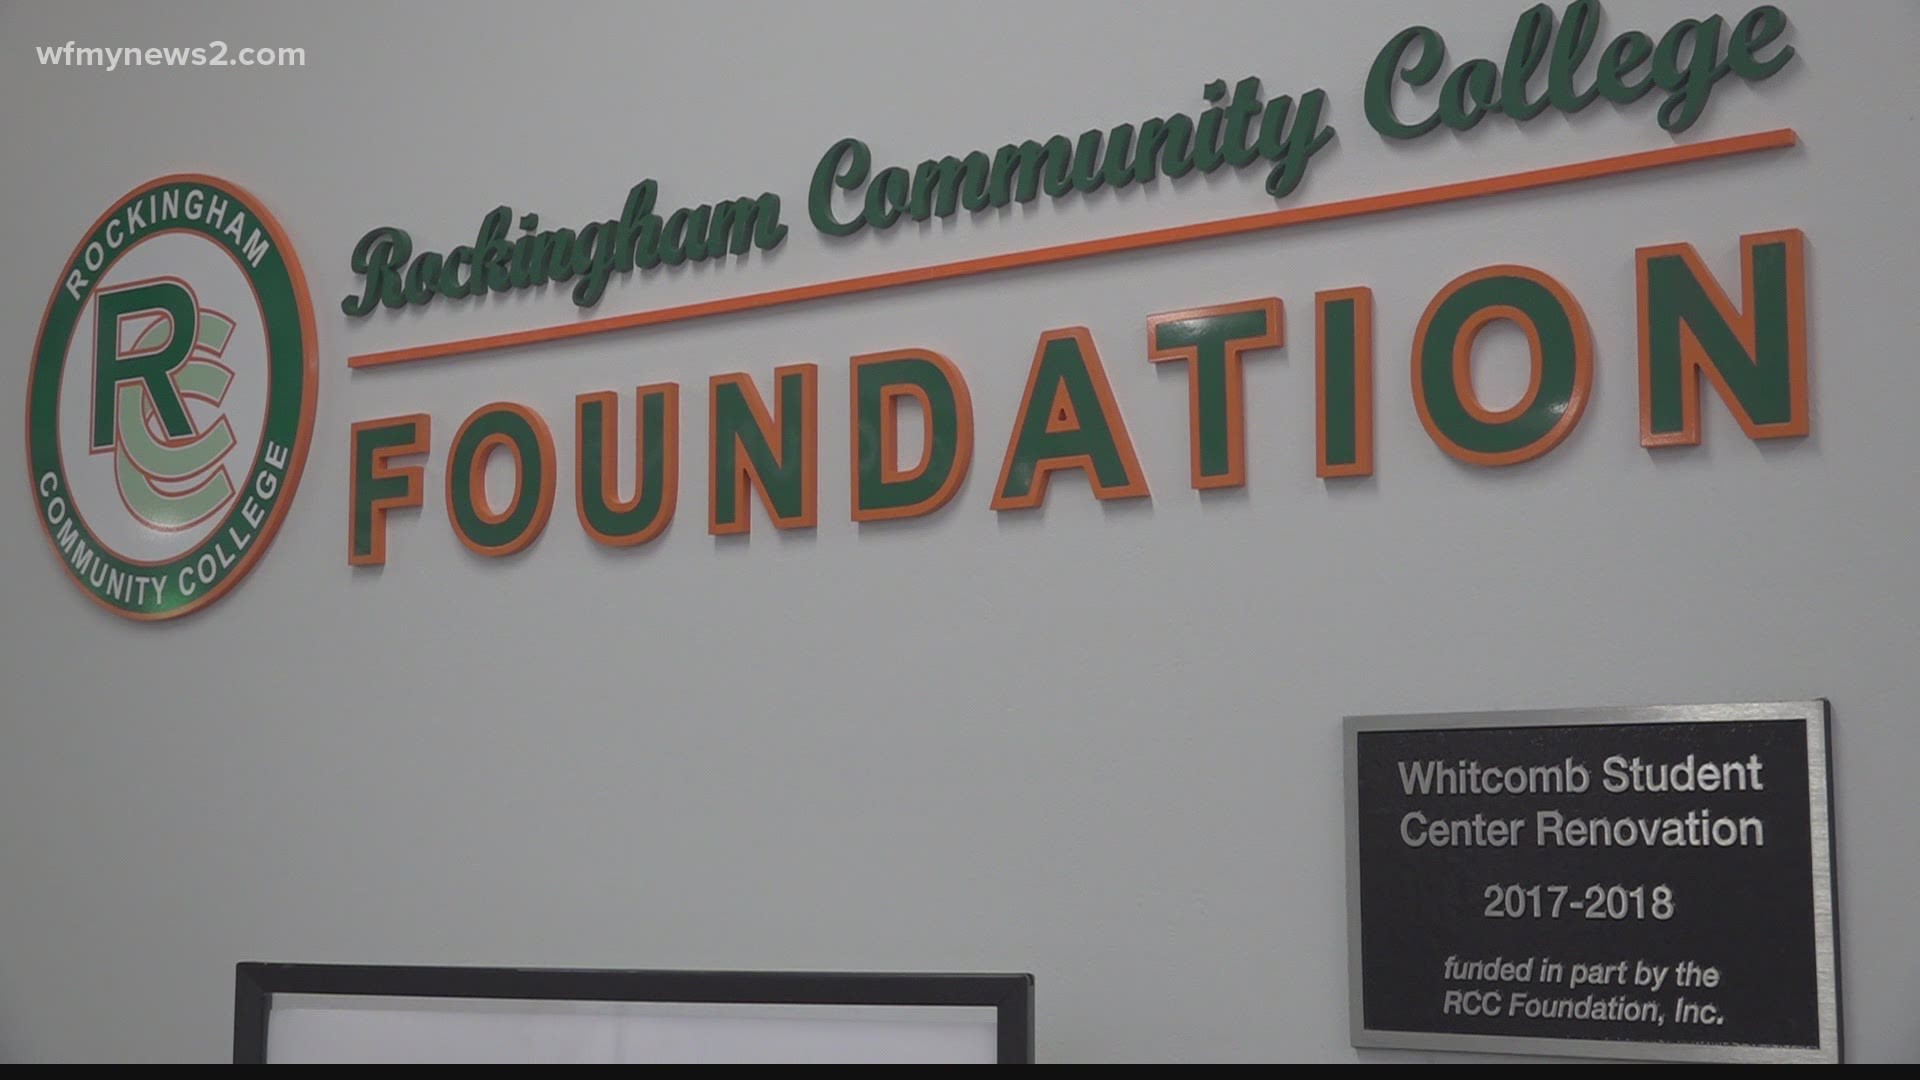 Rockingham Community College is offering two years of free college tuition to the class of 2021.